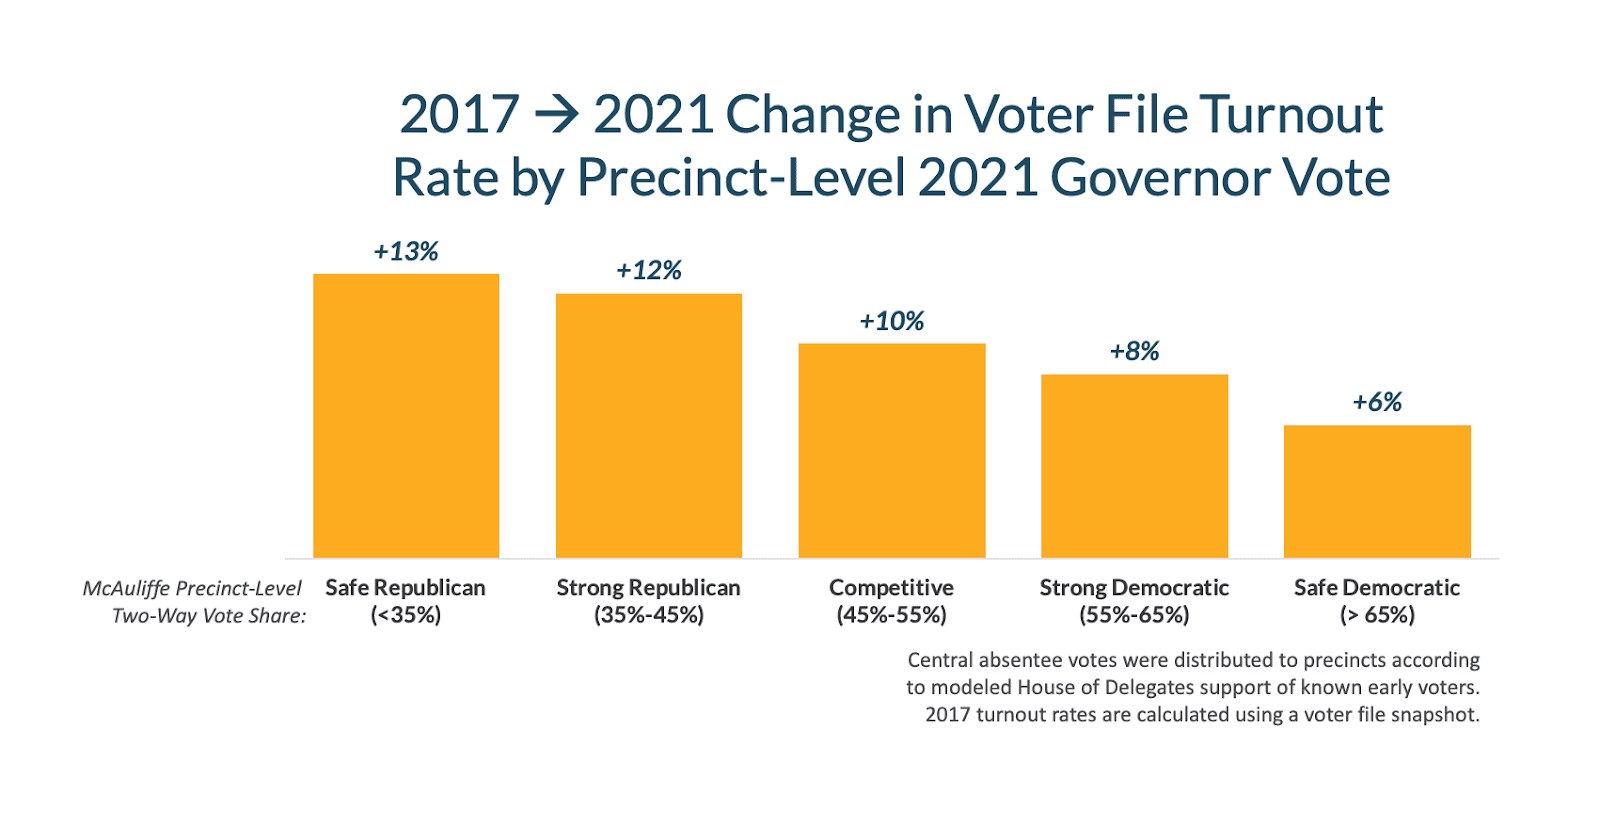 Bar chart showing the change in voter file turnout rate by precinct from 2017 to 2021